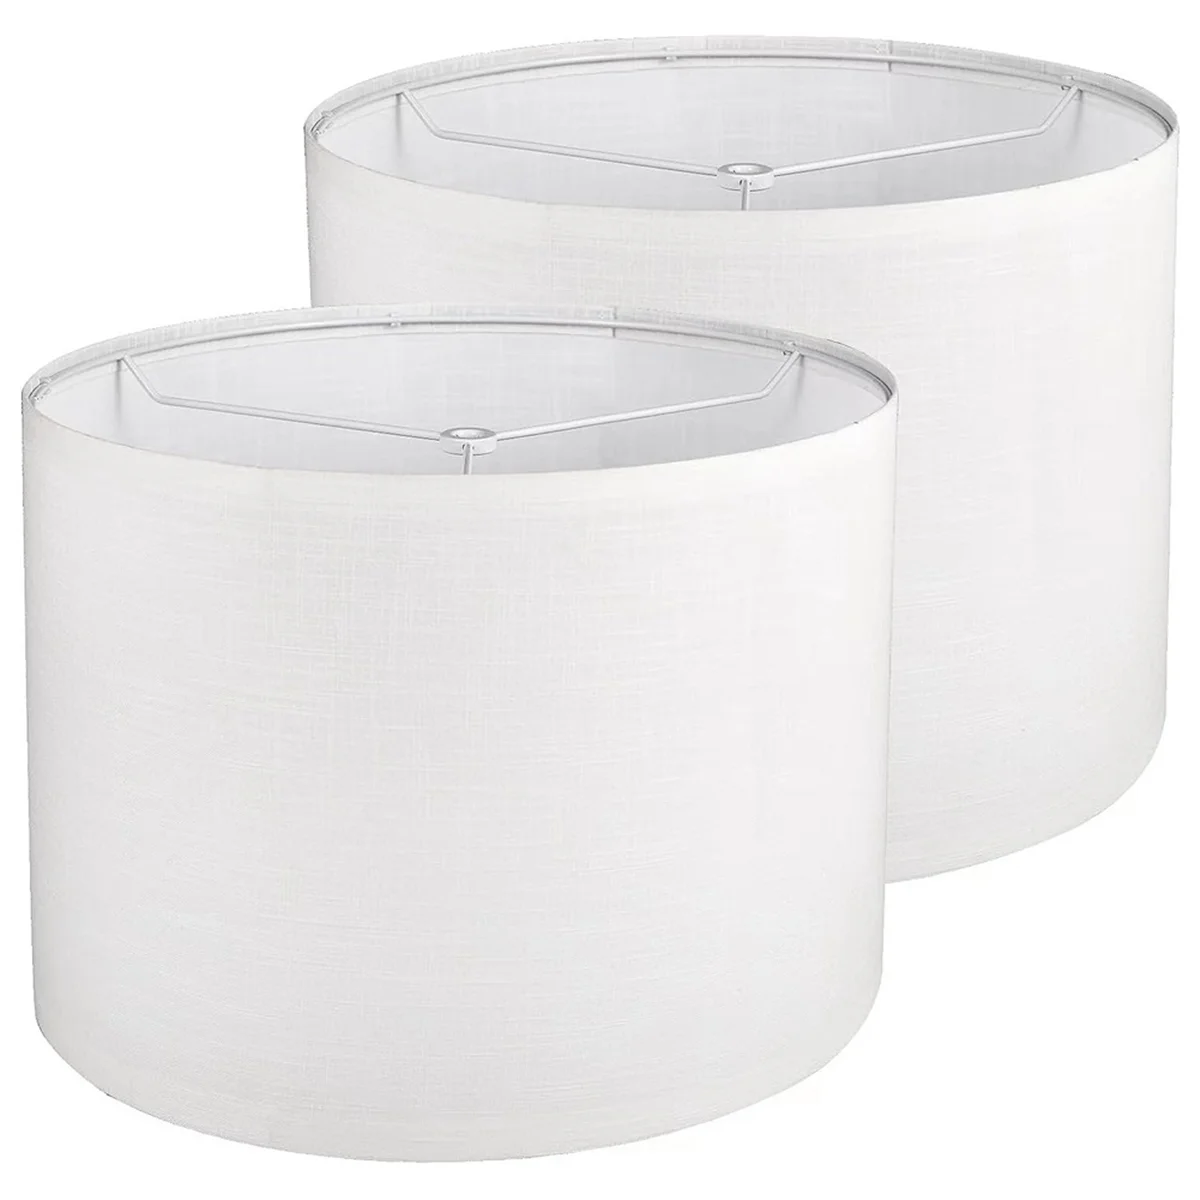 

2Pcs Drum Lampshade, Lamp Shades for Table Lamp Floor Lamp, White Lamp Shades, Easy Assembly Replacement Lampshades